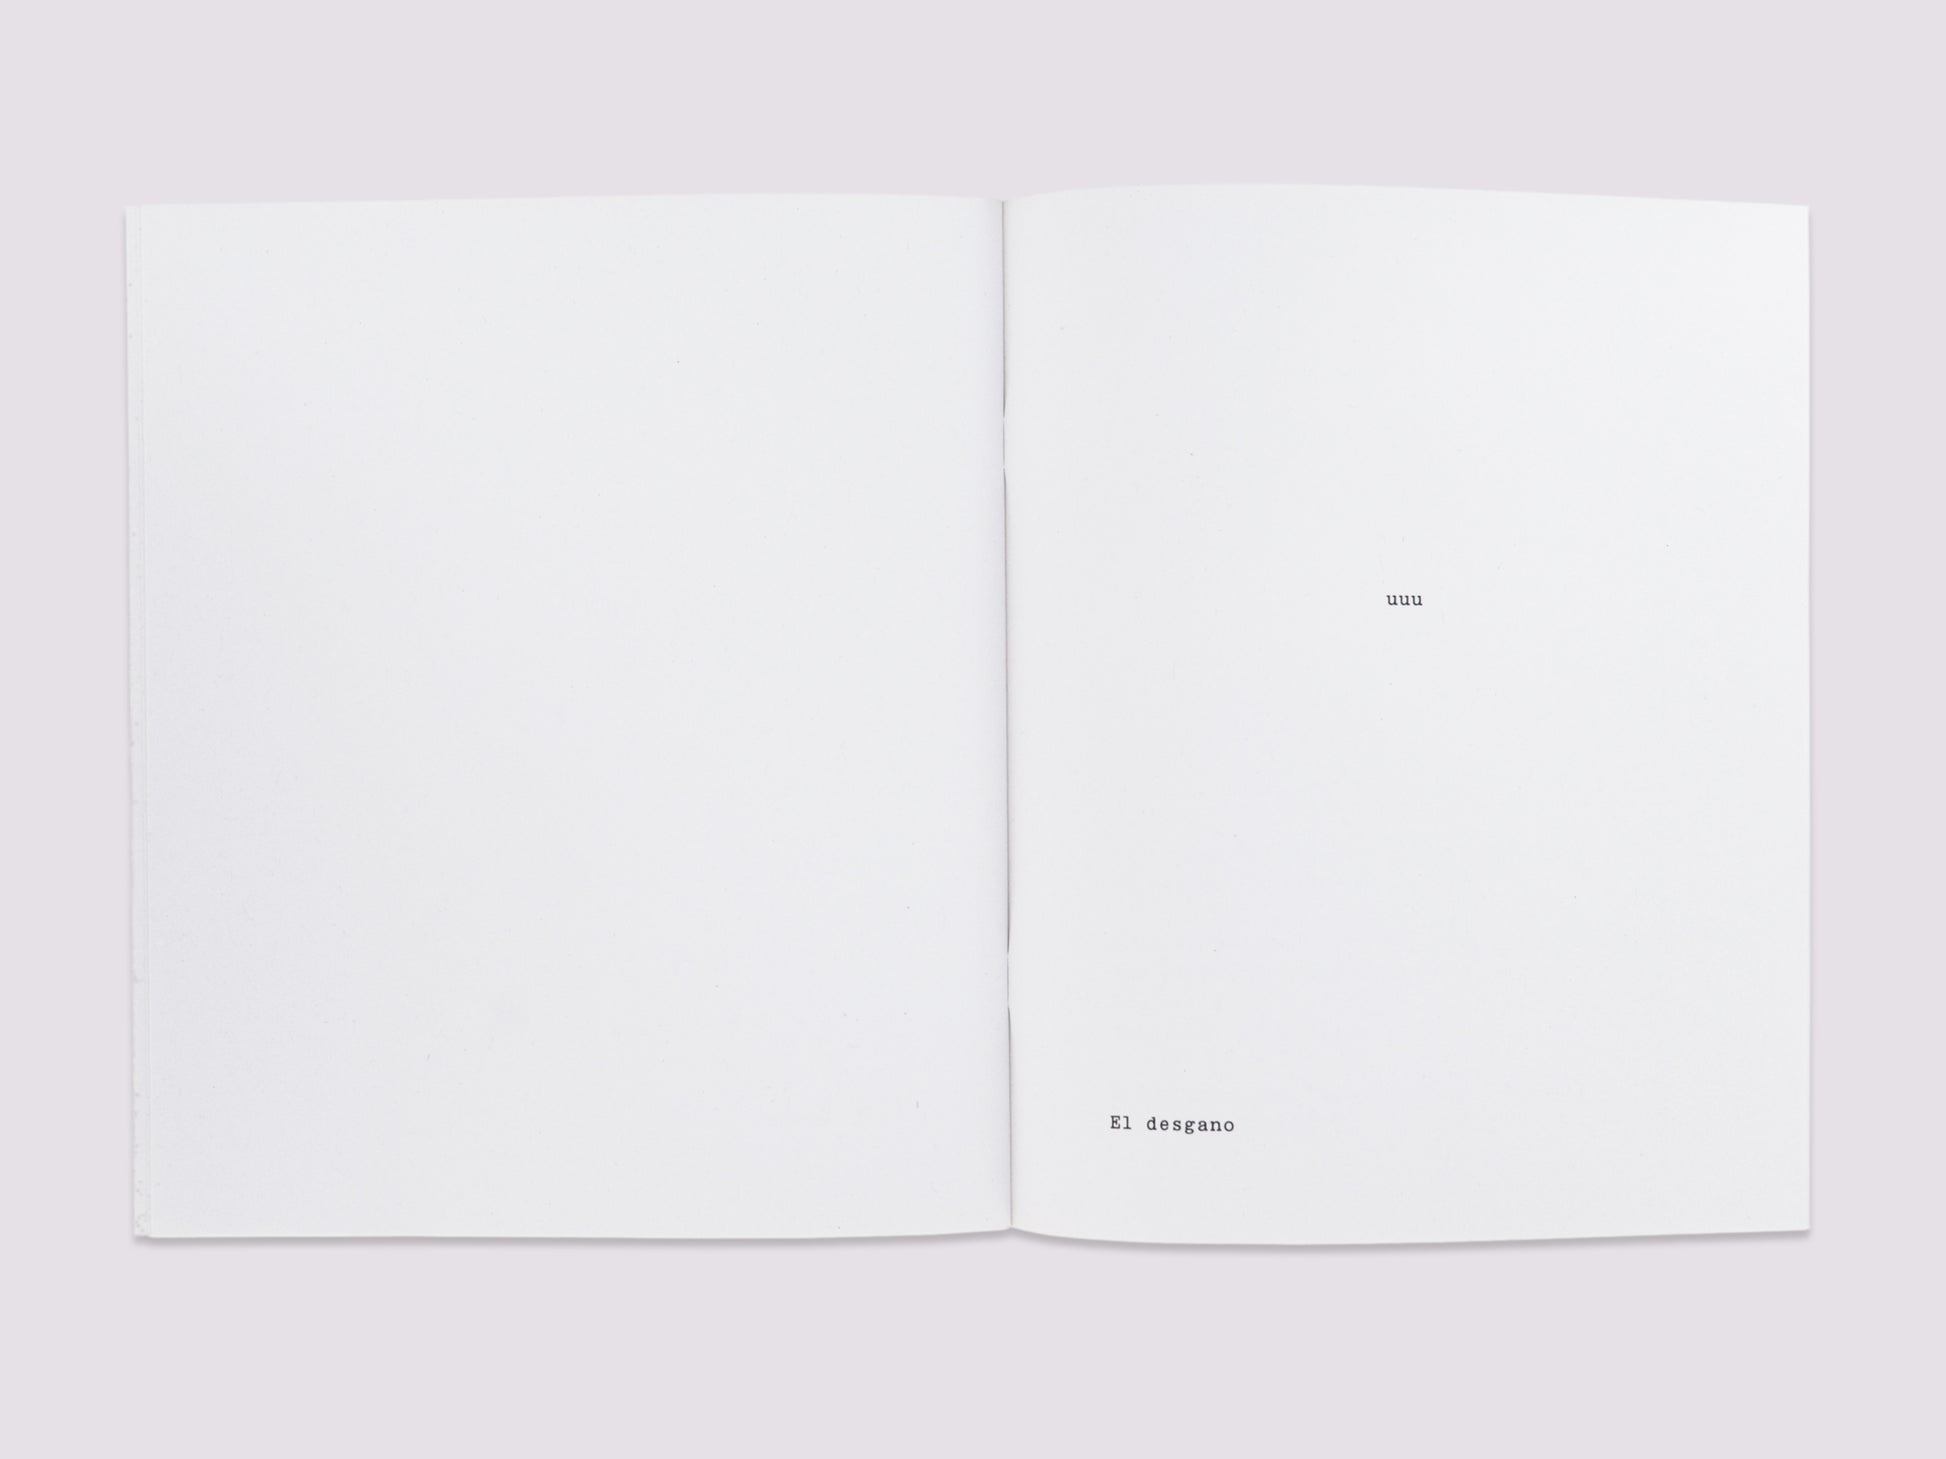 RRR/Ulises Carrión published by Boa Books